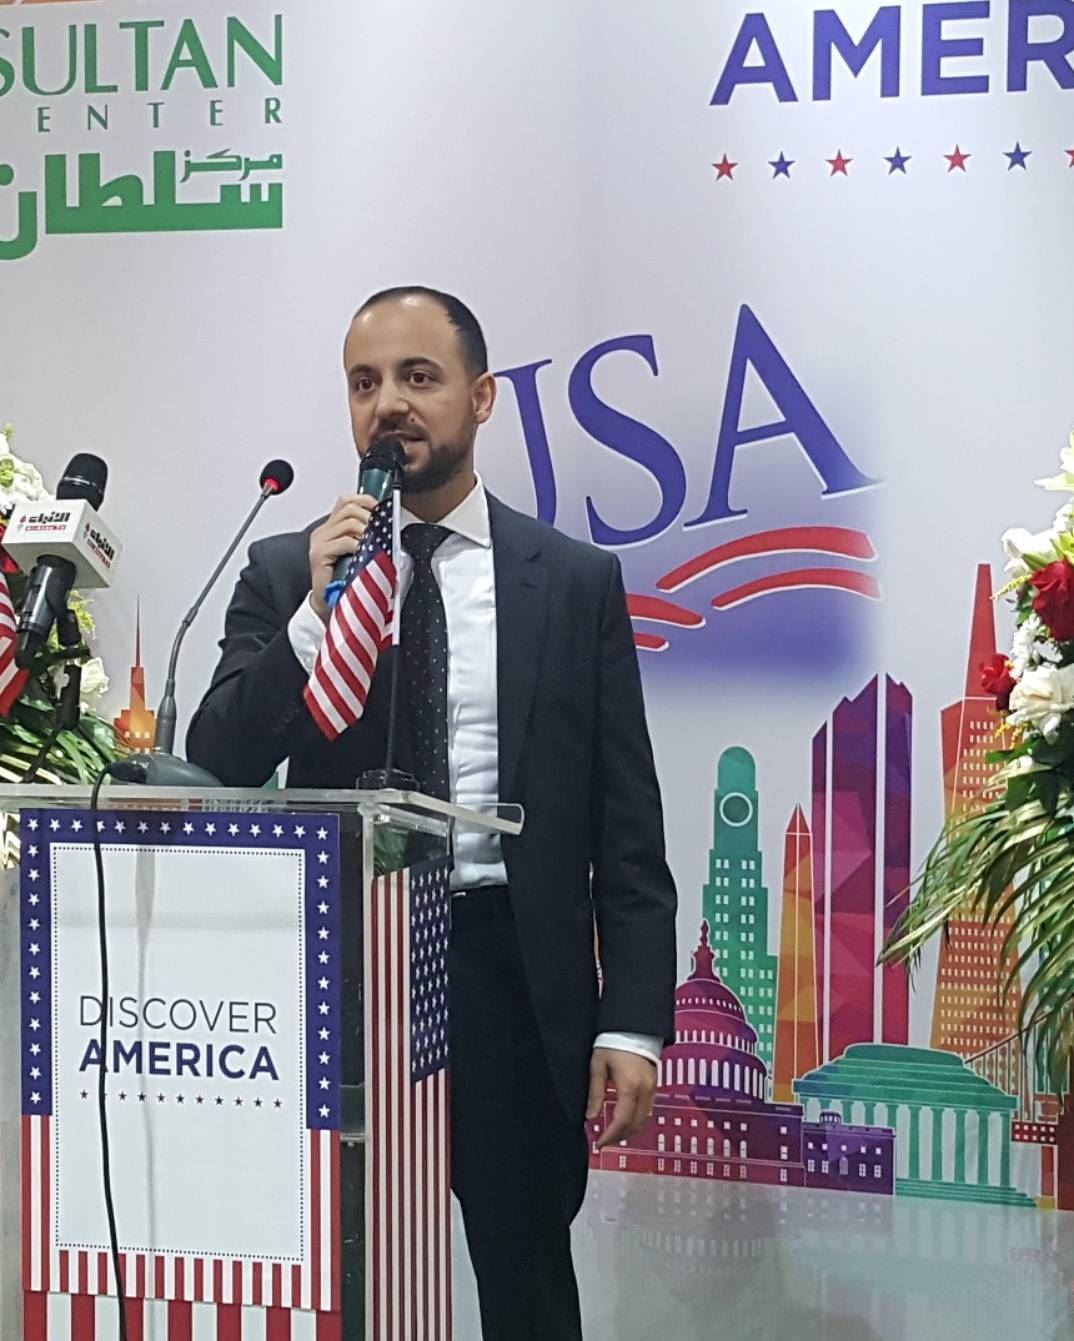 The Sultan Center Celebrates “Discover America Week 2017” 